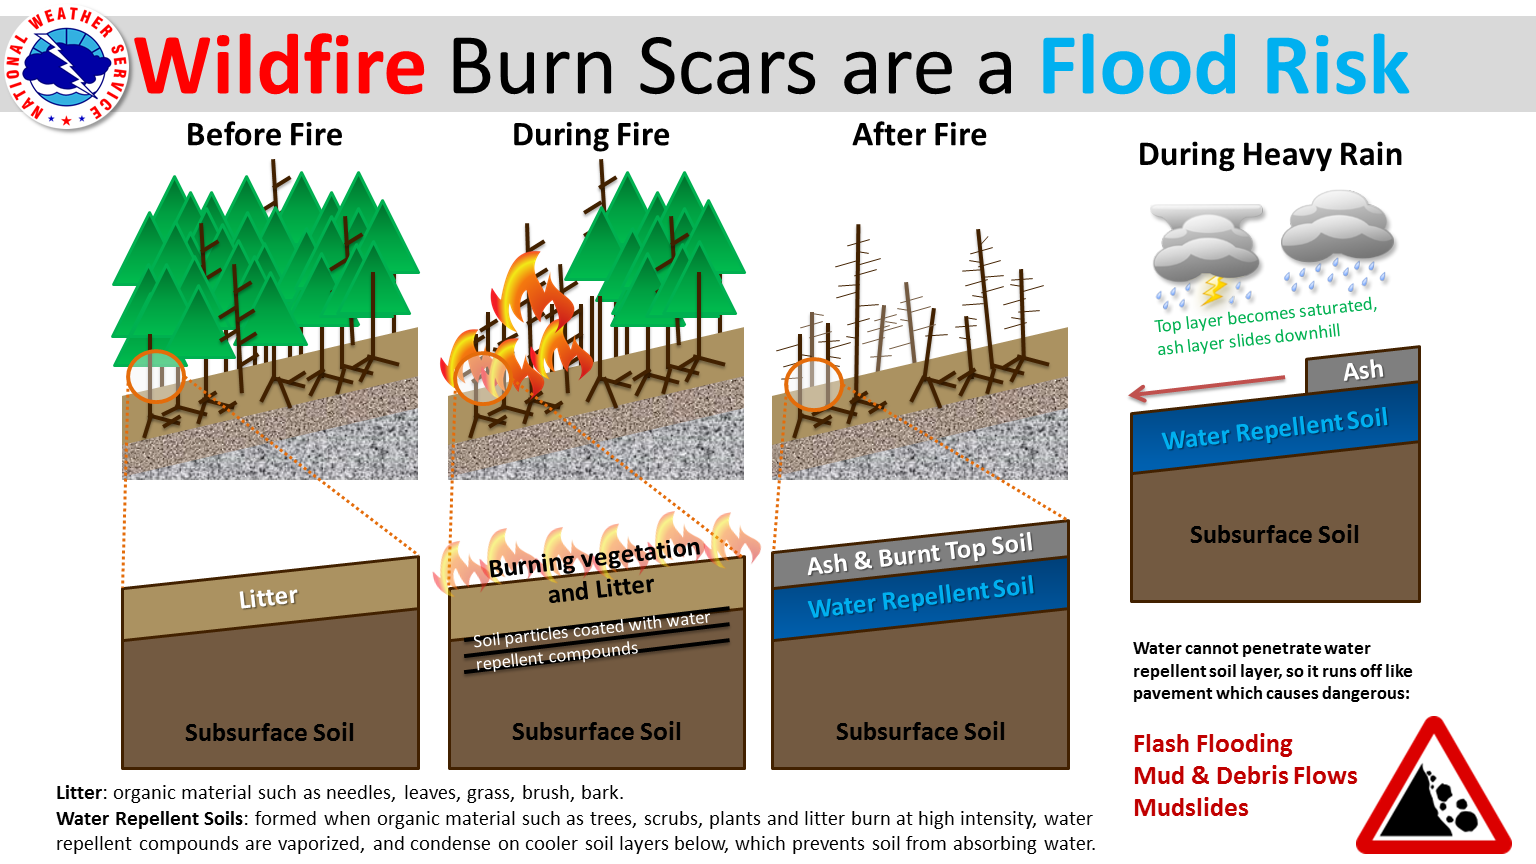 Image showing the National Weather Service Reminder that Wildfire Burn Scars are a Flood Risk